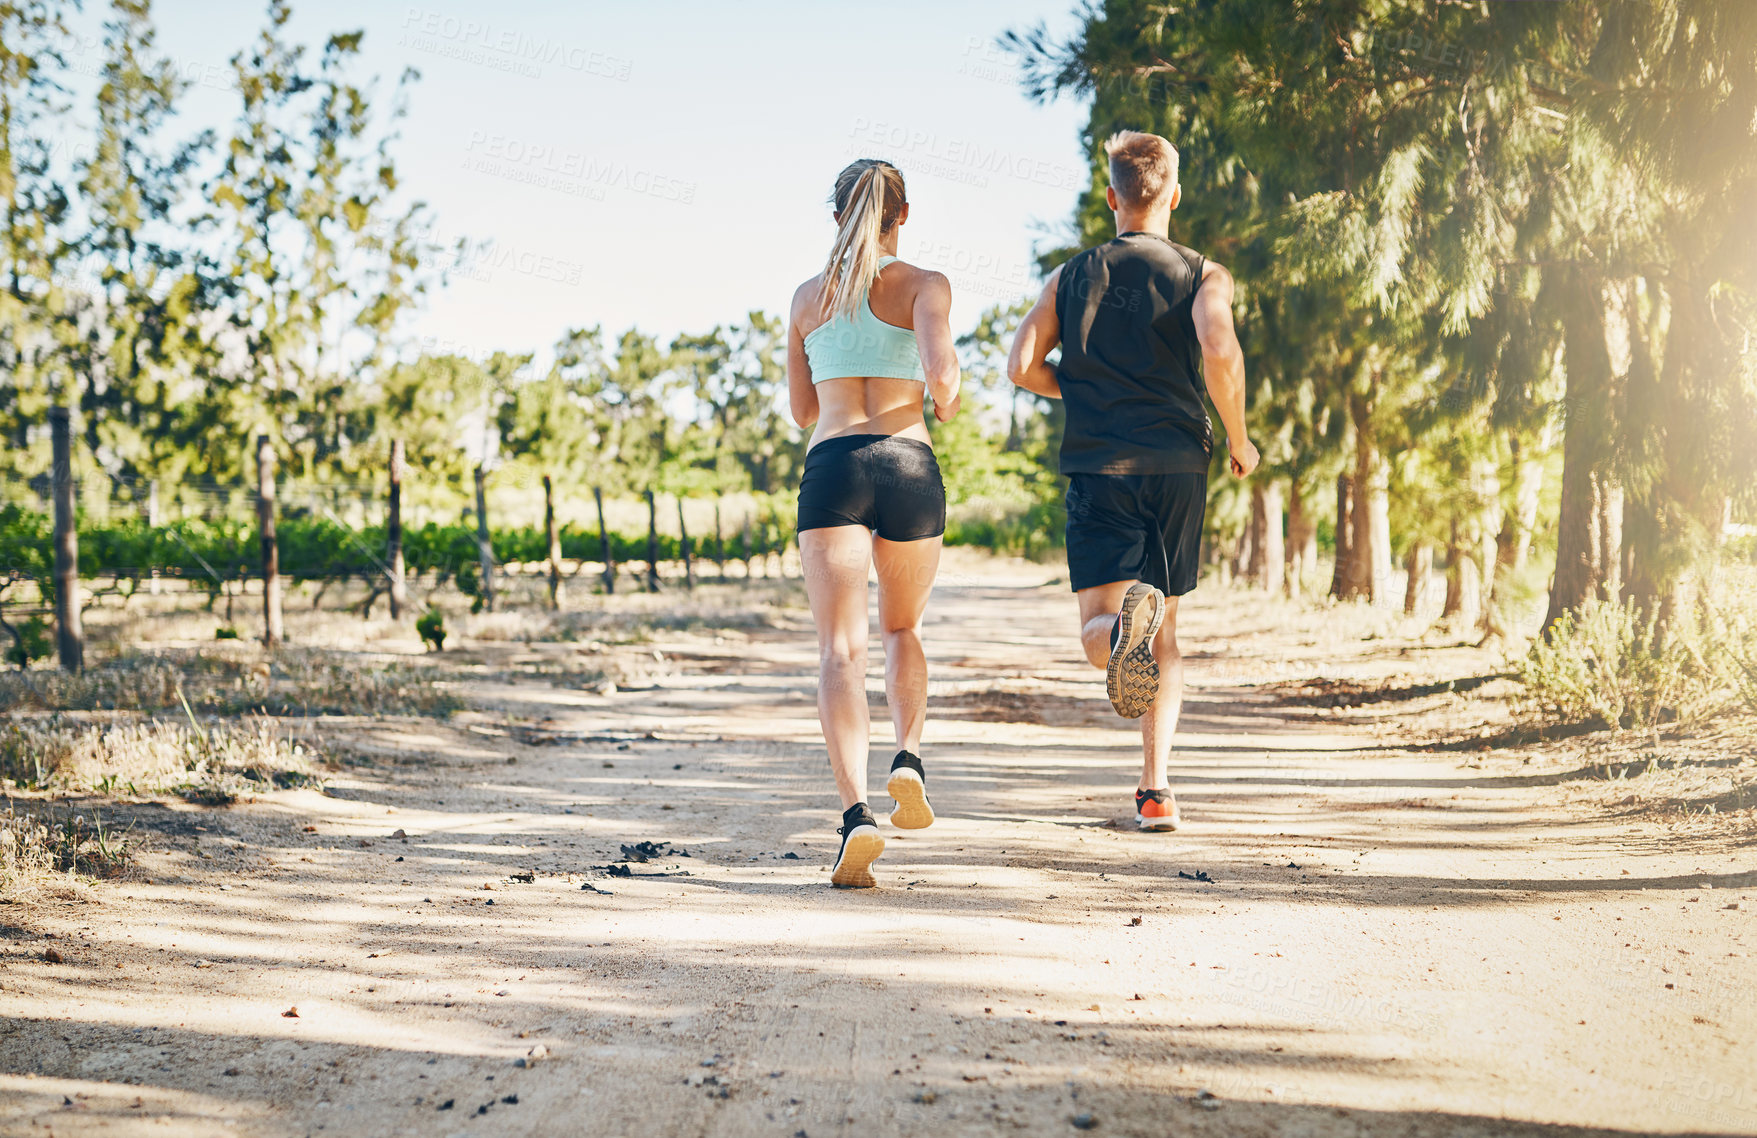 Buy stock photo Rearview shot of a young couple running together outdoors